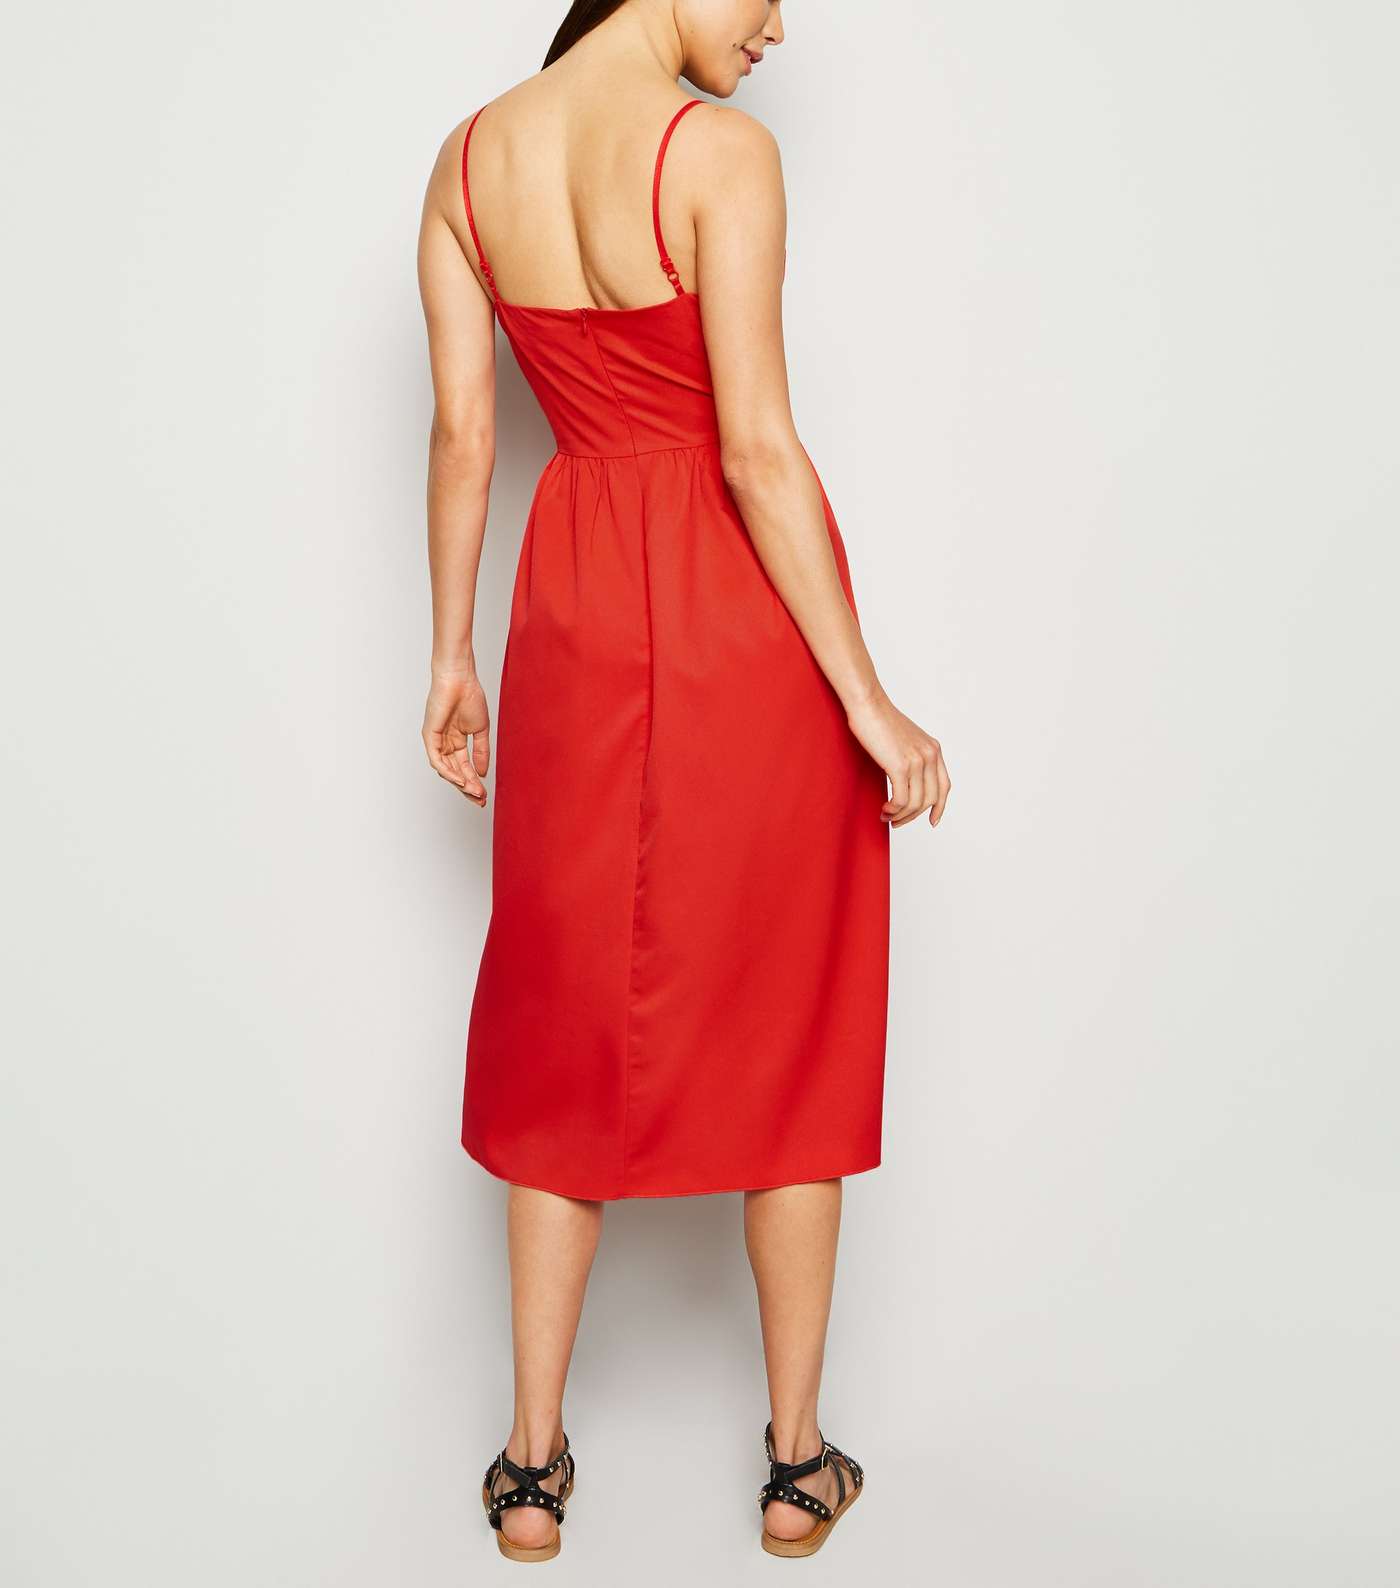 Cameo Rose Red Button Midi Dress Image 2